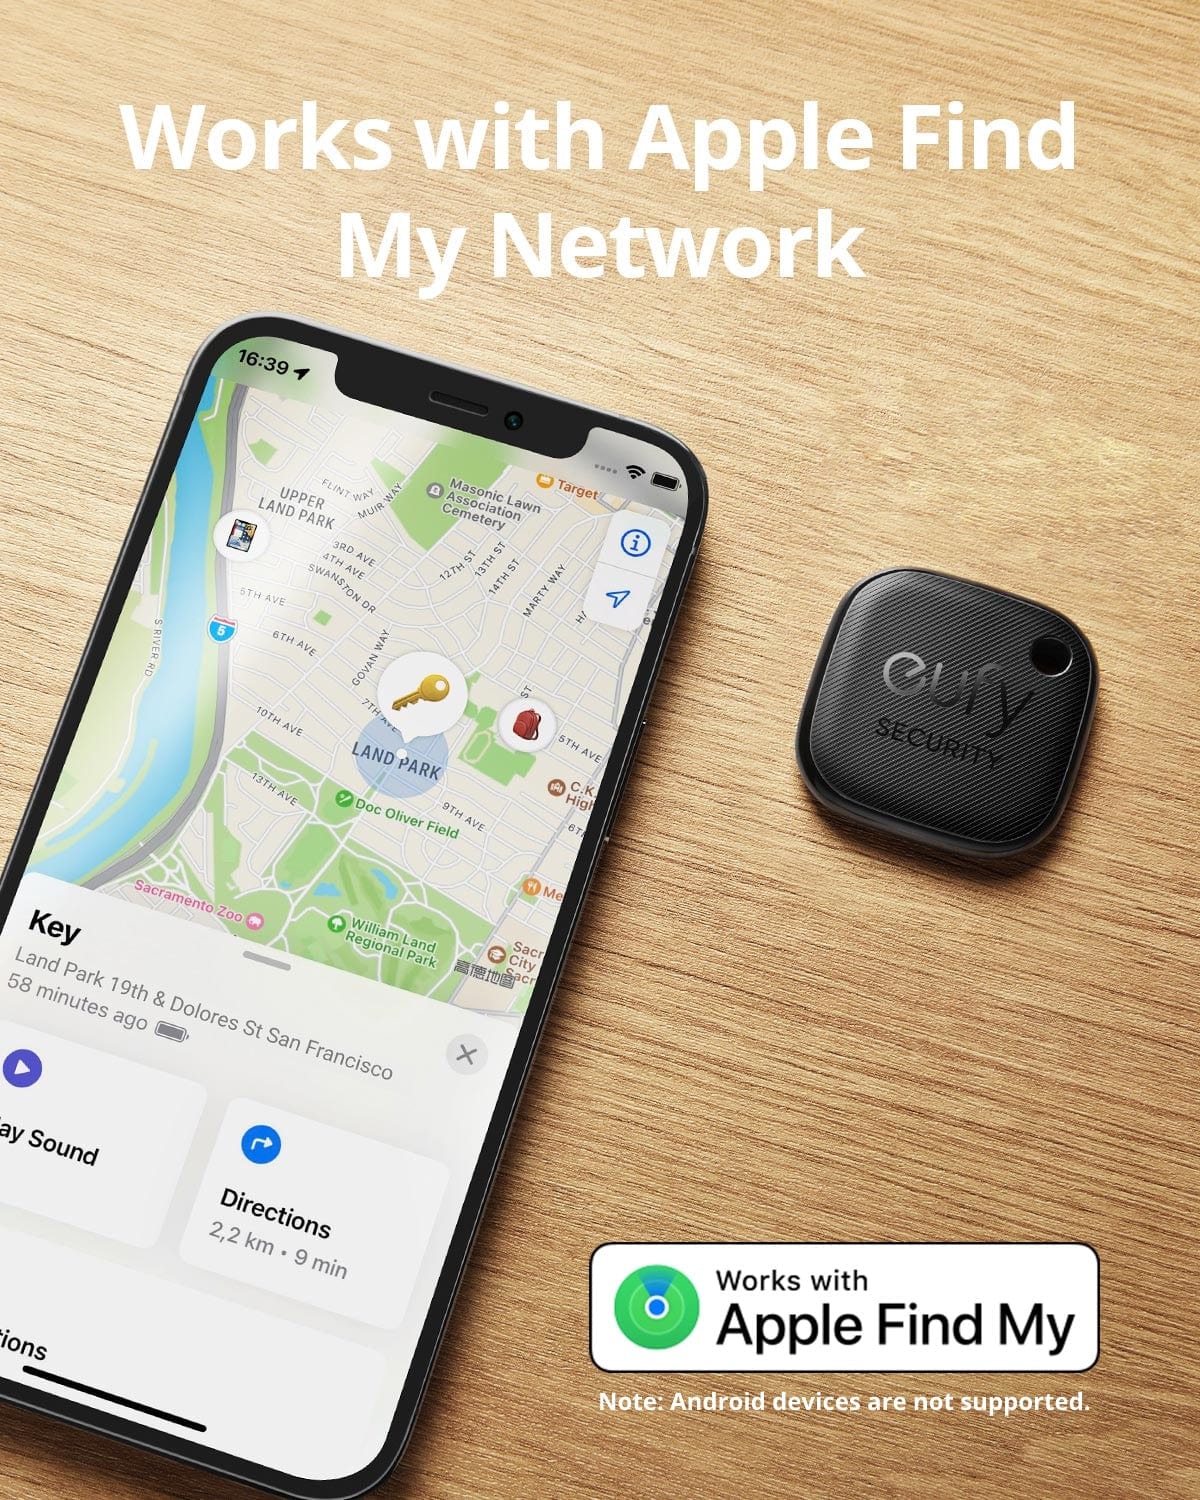 eufy eufy Security, Tracking Devices, T87B0 version